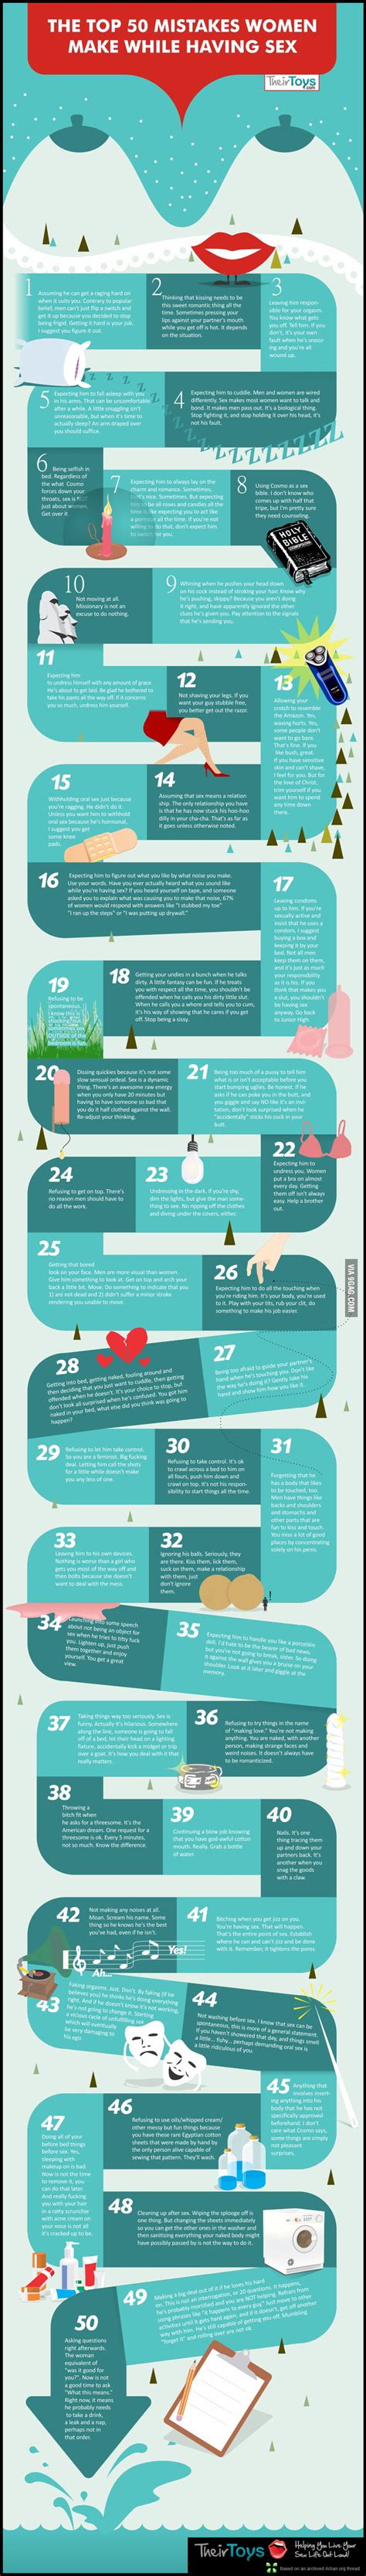 The Top 50 Mistakes Women Make While Having Sex 9gag